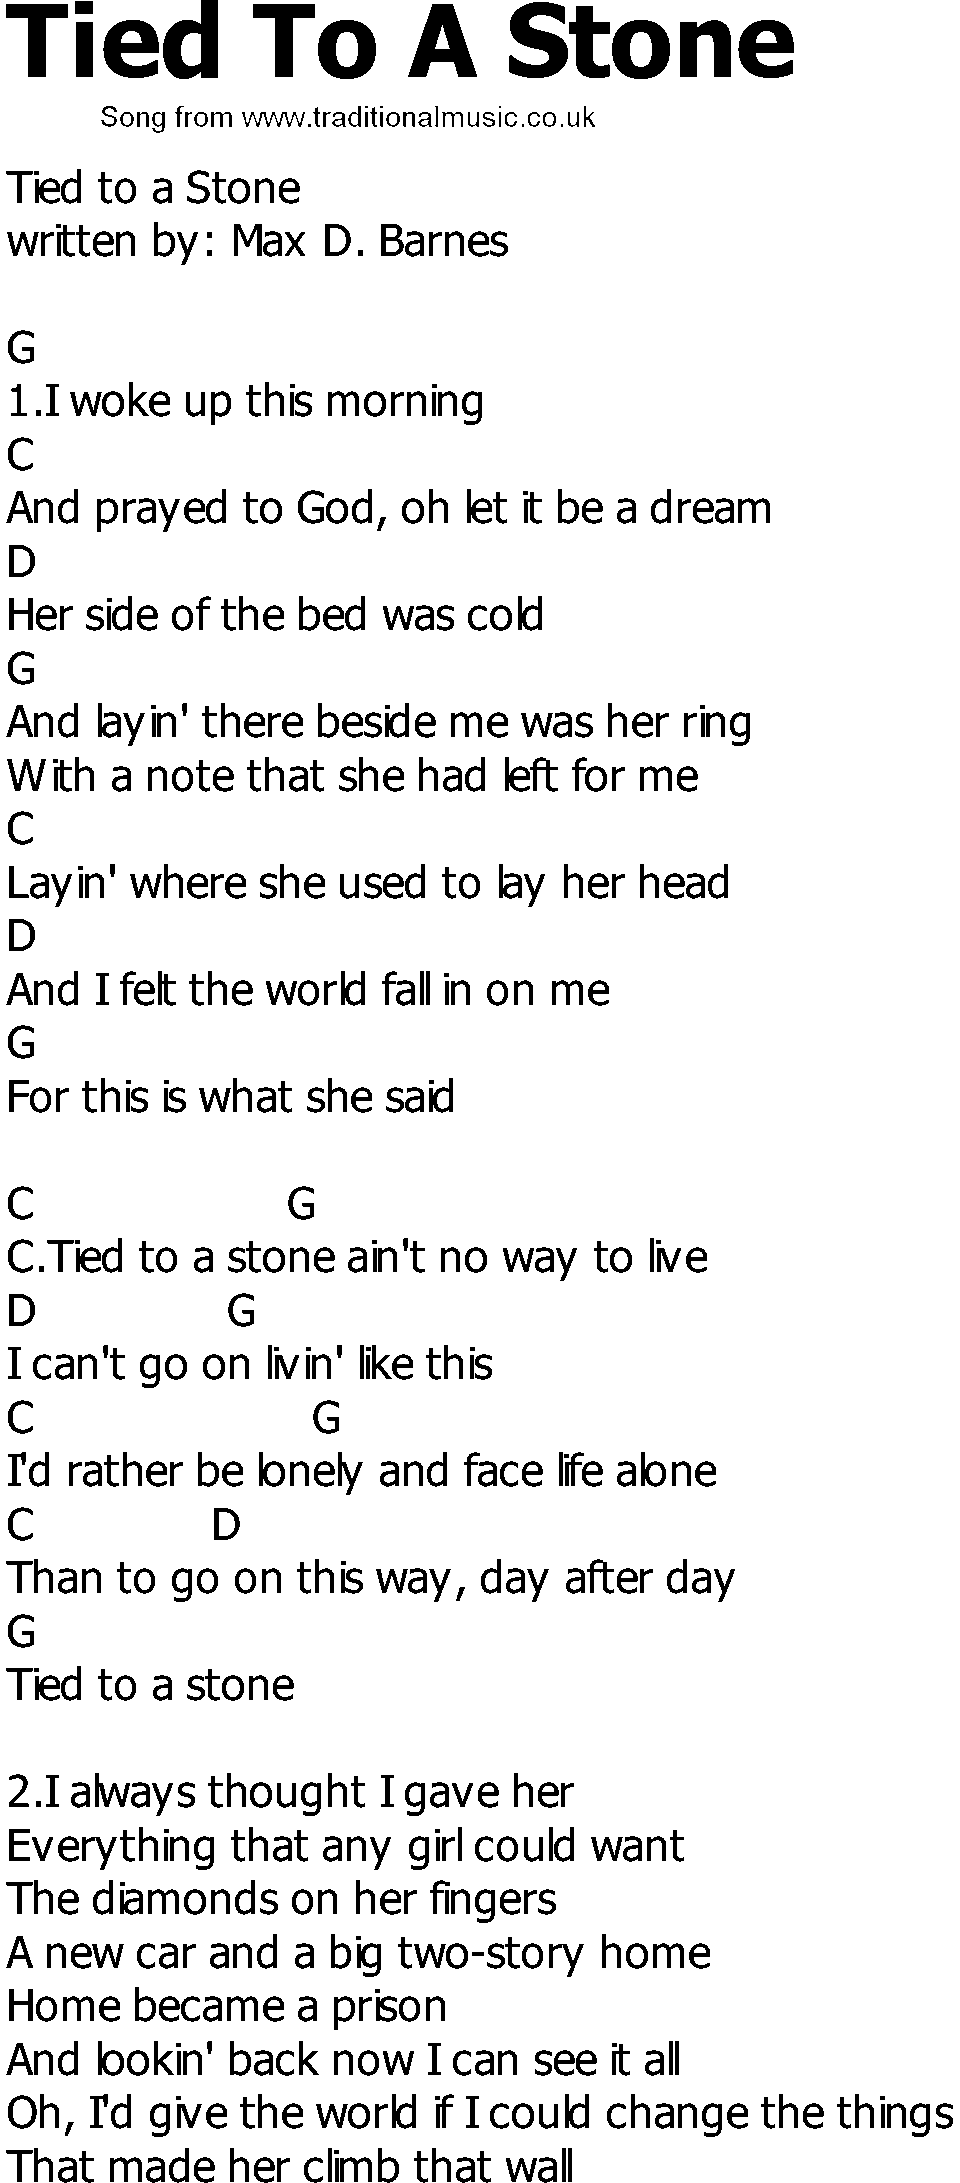 Old Country song lyrics with chords - Tied To A Stone